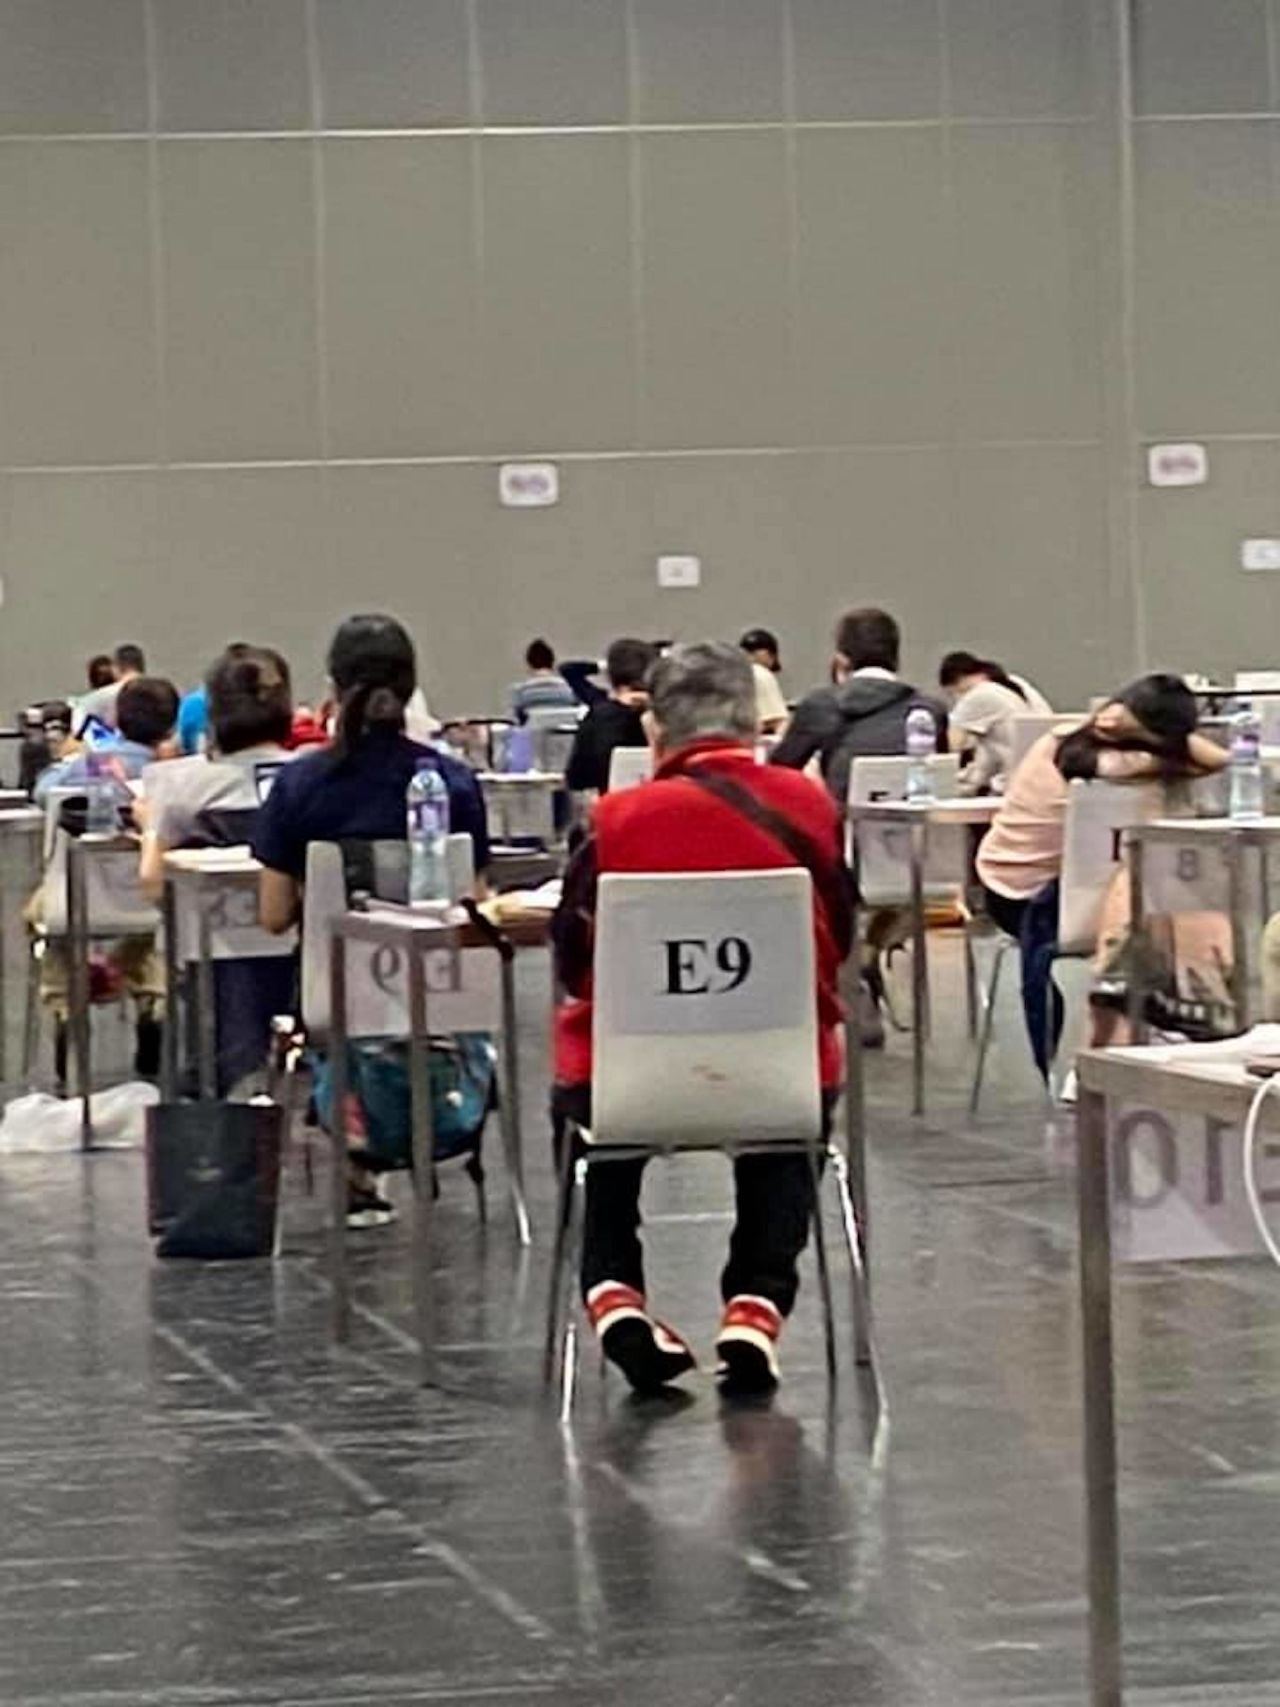 Anna Gong waits for her test results. Sharon Hawkins Leung, who took this photo, joked she had just tried to "make a run for it but the guards made her return to seat!"